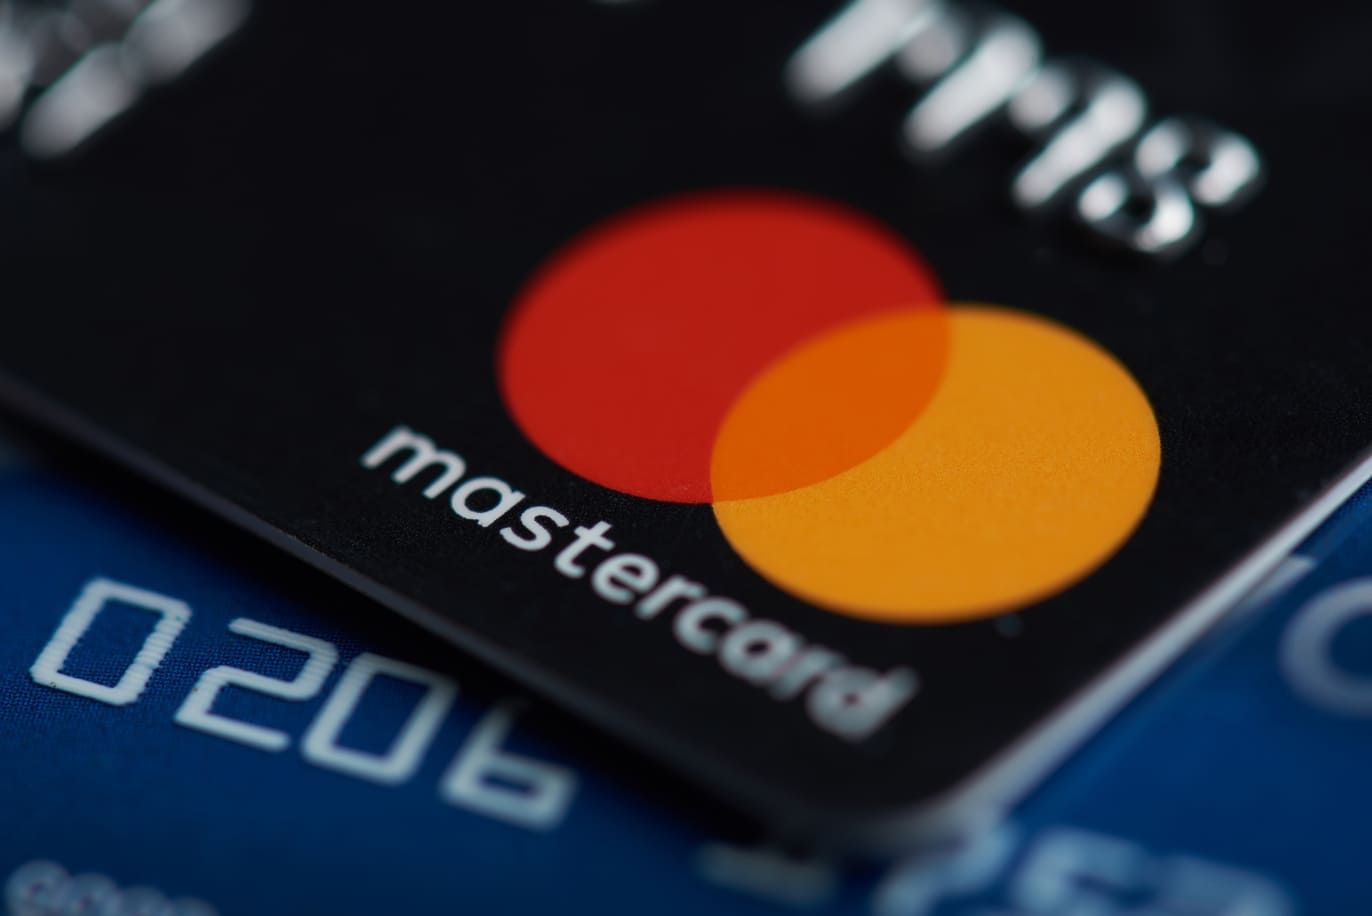 Mastercard Files 15 Trademark Applications for a Range of Metaverse Services